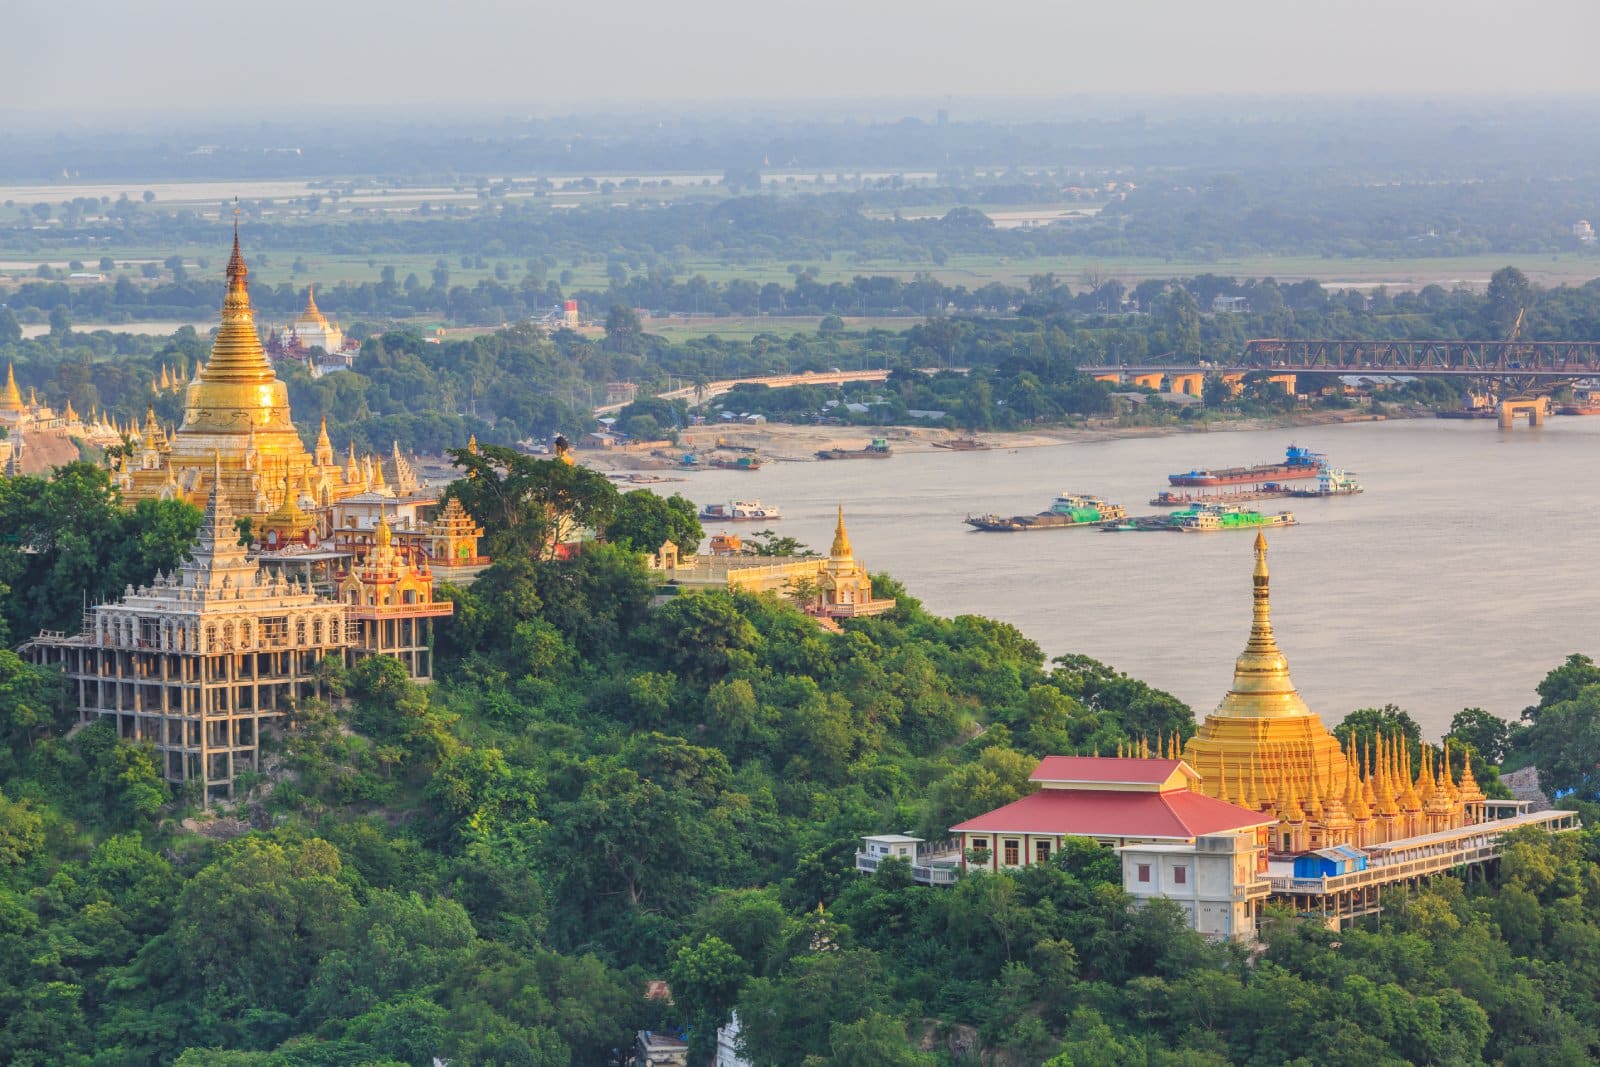 Image Credit: Shutterstock / Avigator Fortuner <p>Countries such as Myanmar and Sudan are experiencing political unrest that can affect safety for tourists. Stay updated with government travel advisories before visiting these areas.</p>